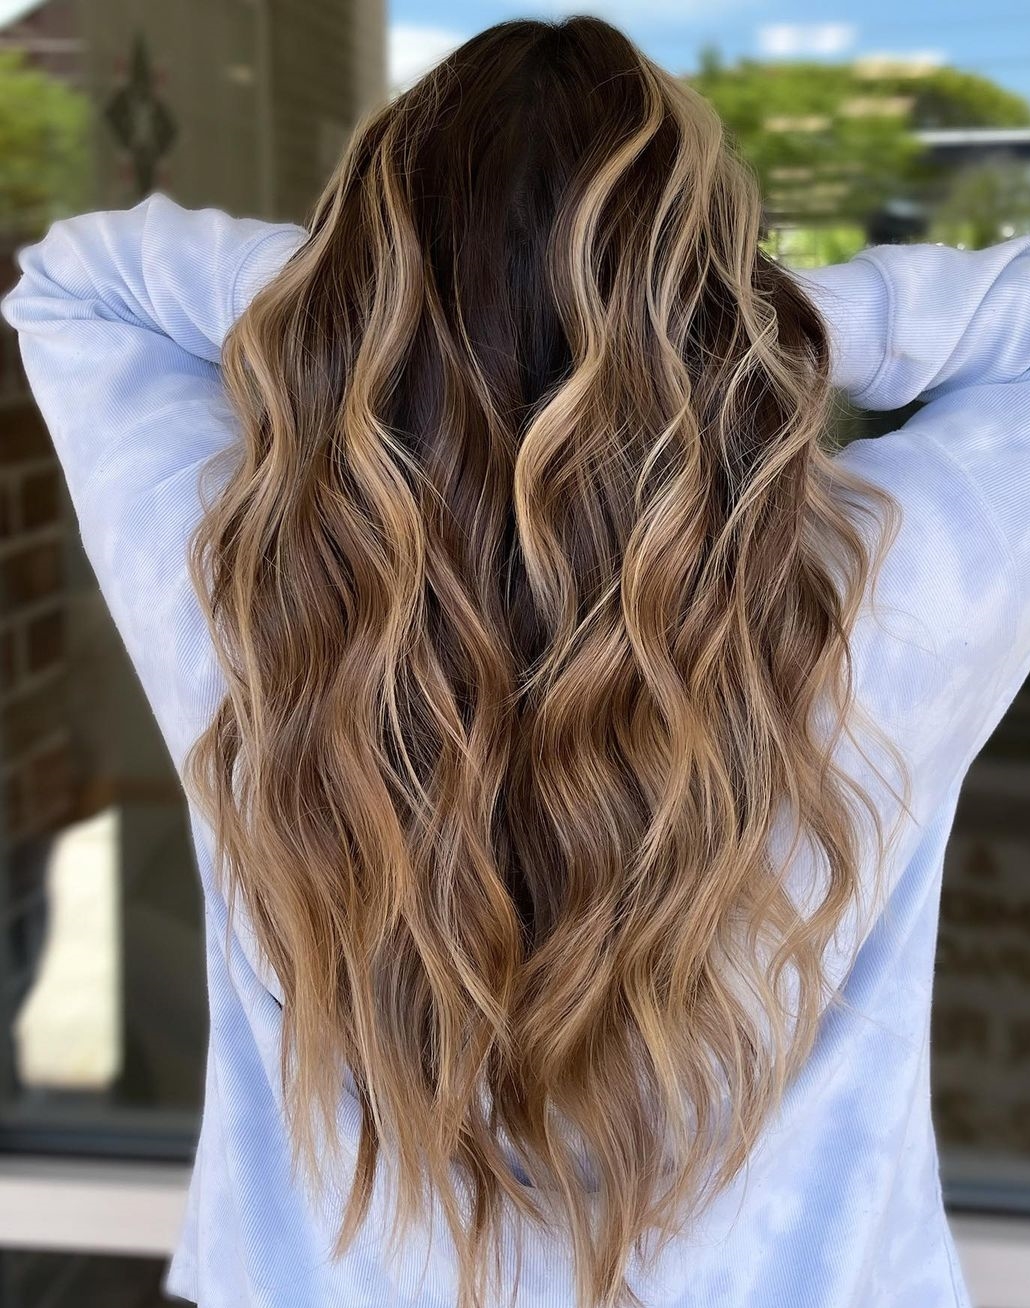 Top 22 Dirty Blonde Hair Color Ideas for a Change-Up - Hairstylery